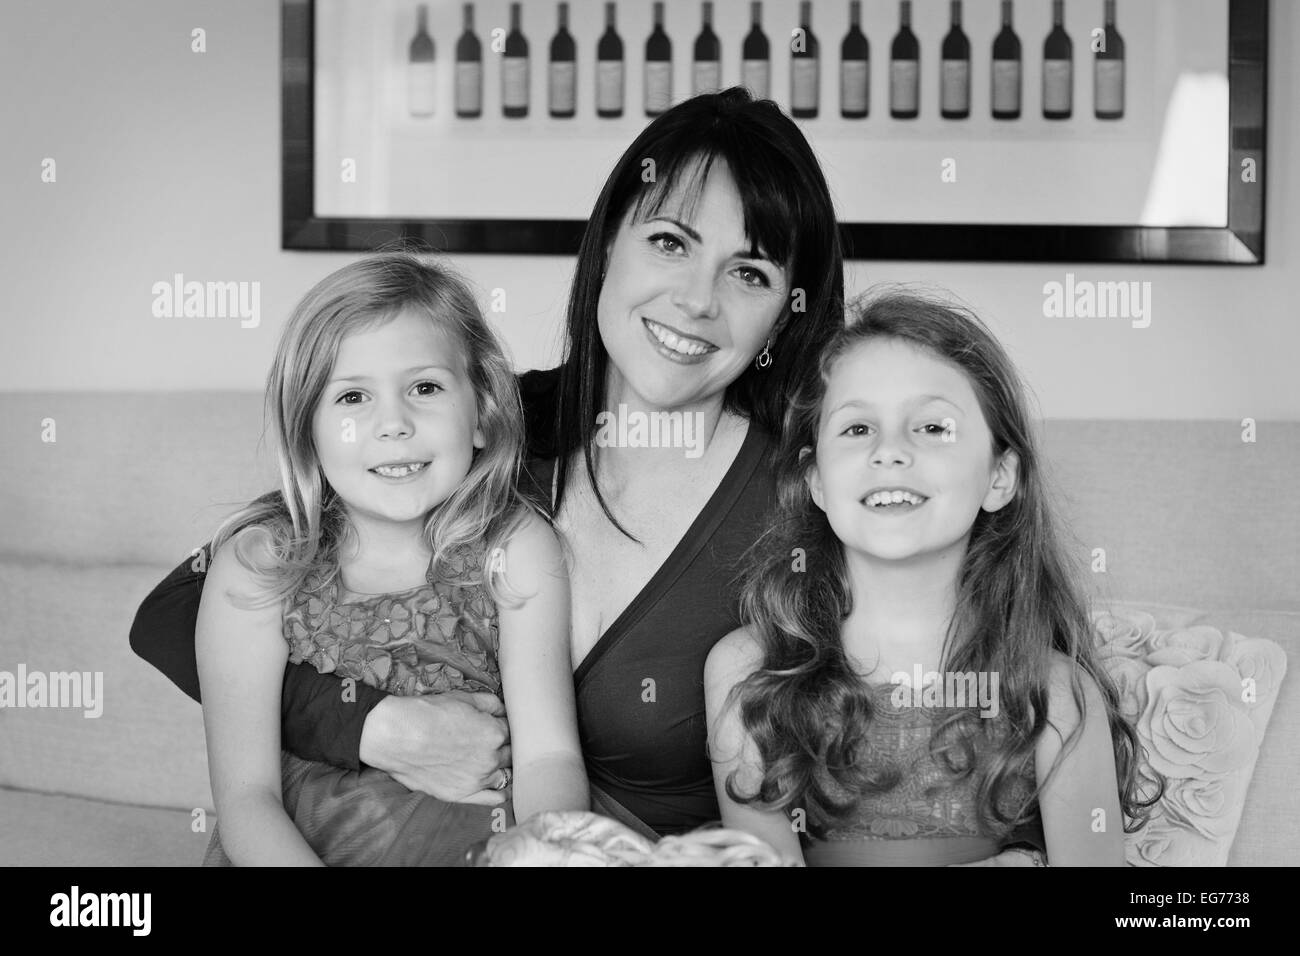 Single mom and her two pretty daughters Stock Photo